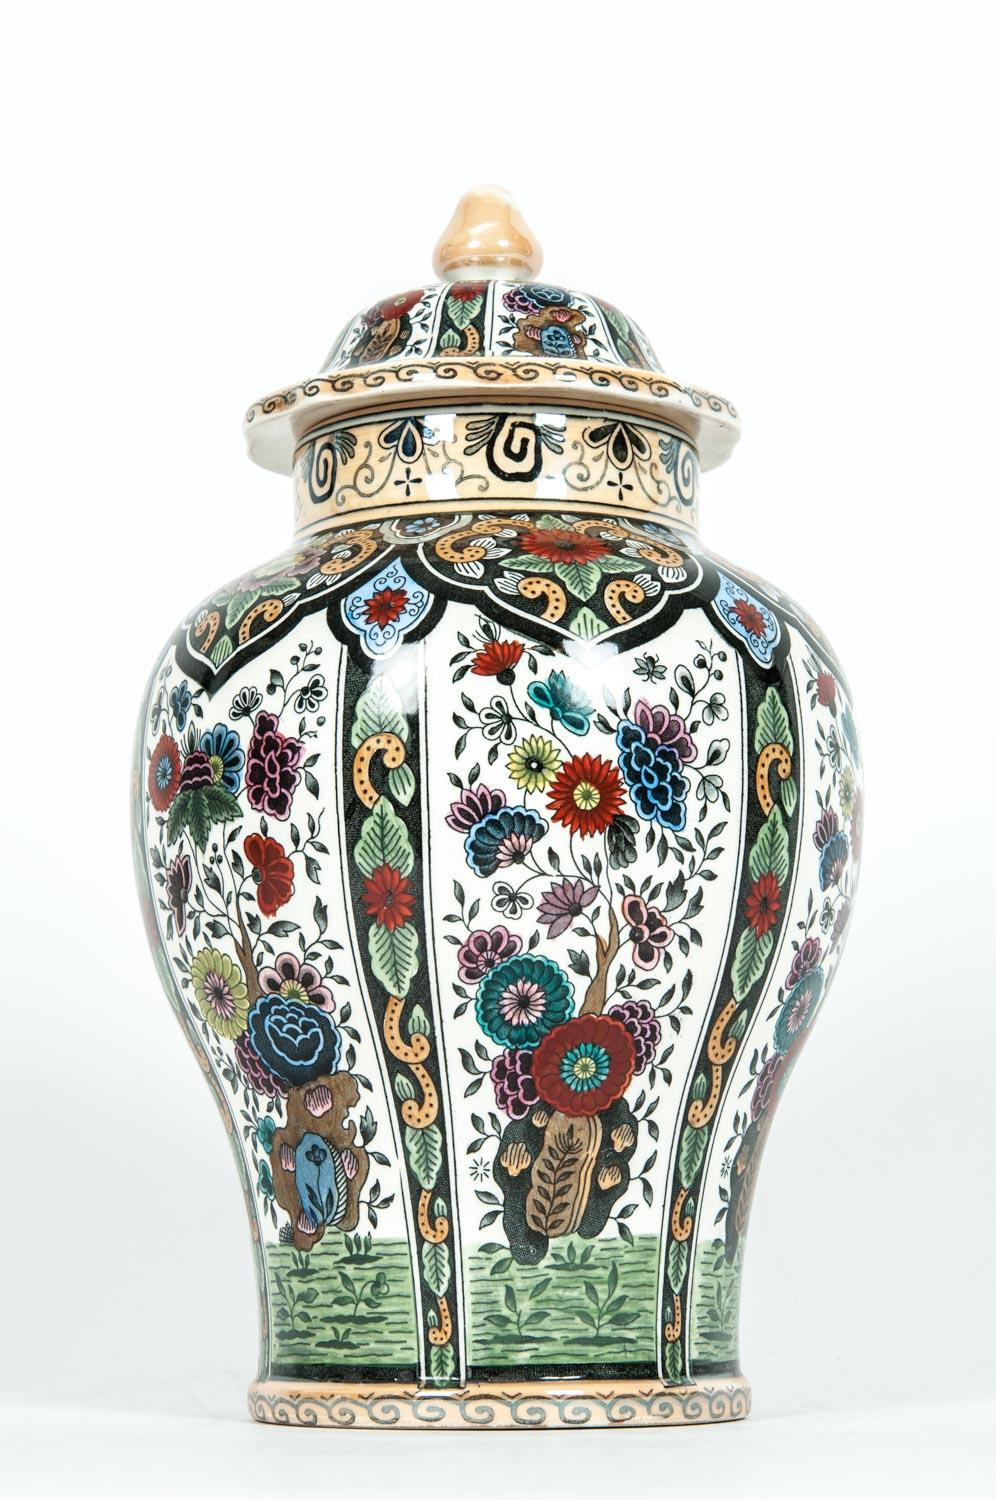 Vintage Dutch porcelain decorative covered urn. The covered urn is in excellent condition, maker's mark undersigned. The piece measure about 11.5 inches high X 8 inches diameter.